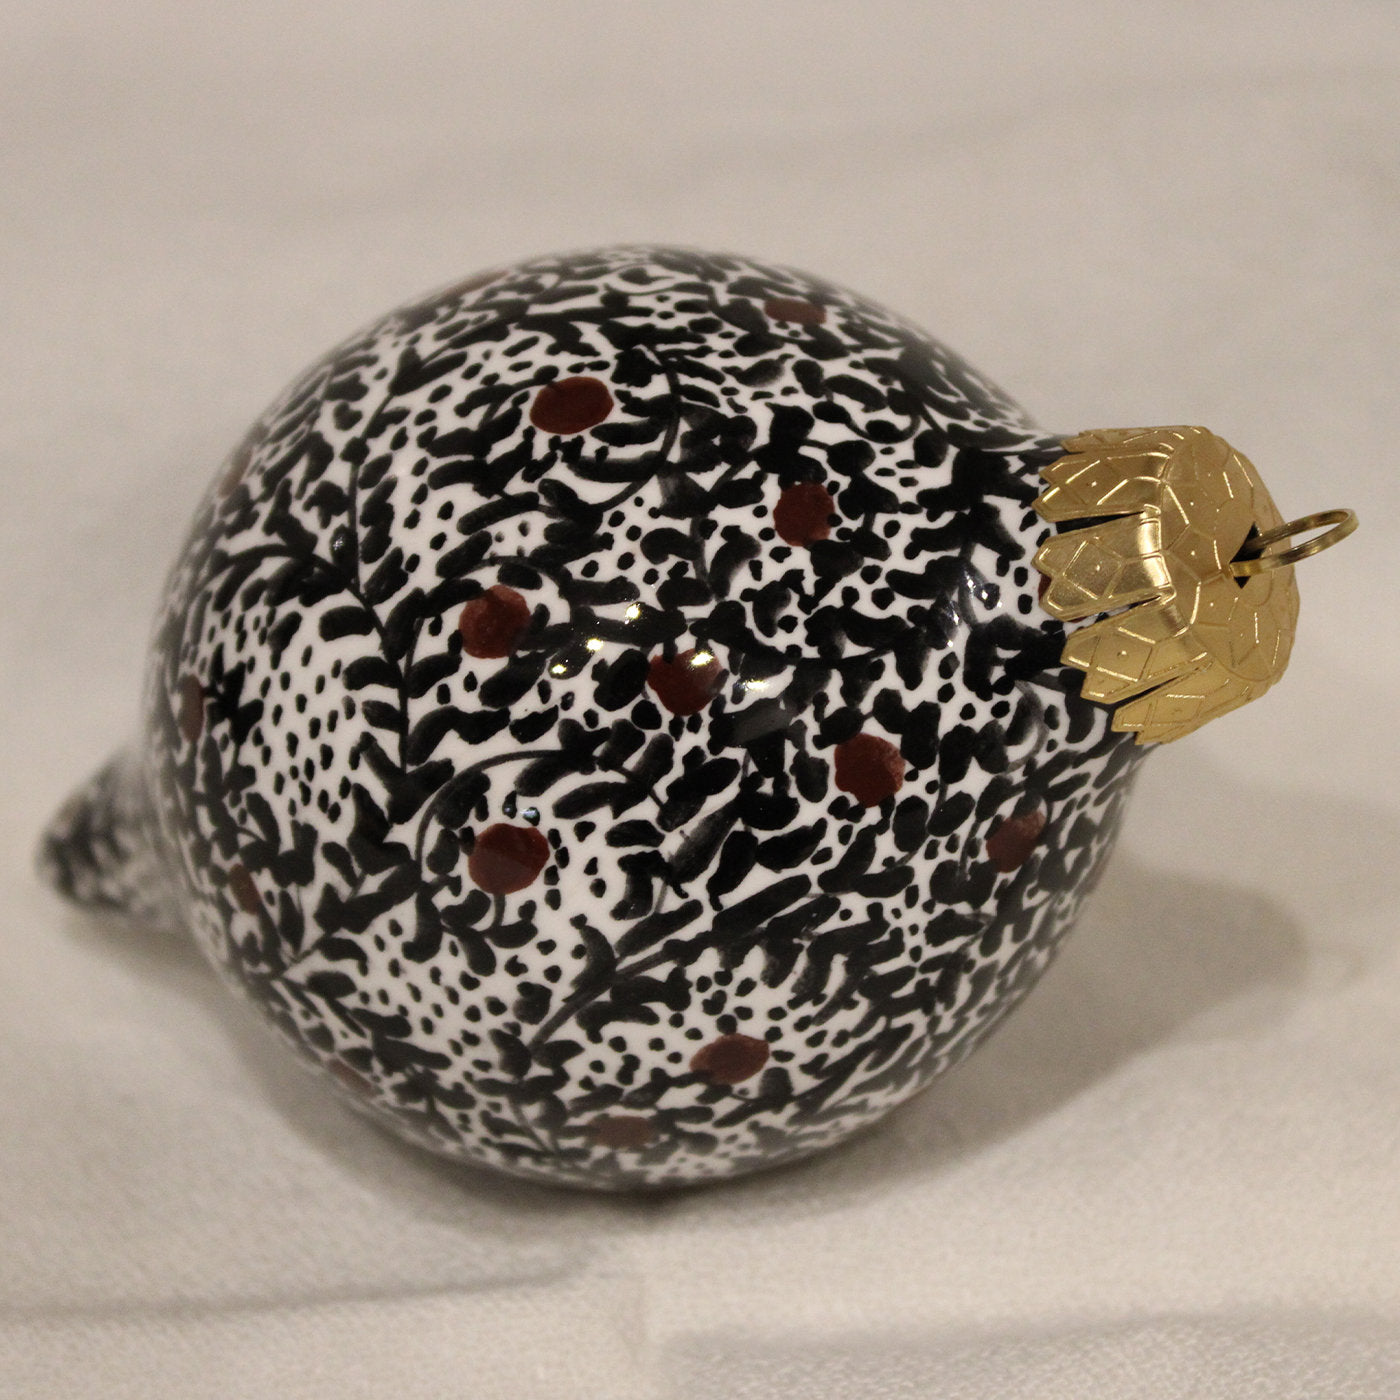 Black Dotted Floral Teardrop Christmas Ball Ornament  - Alternative view 3